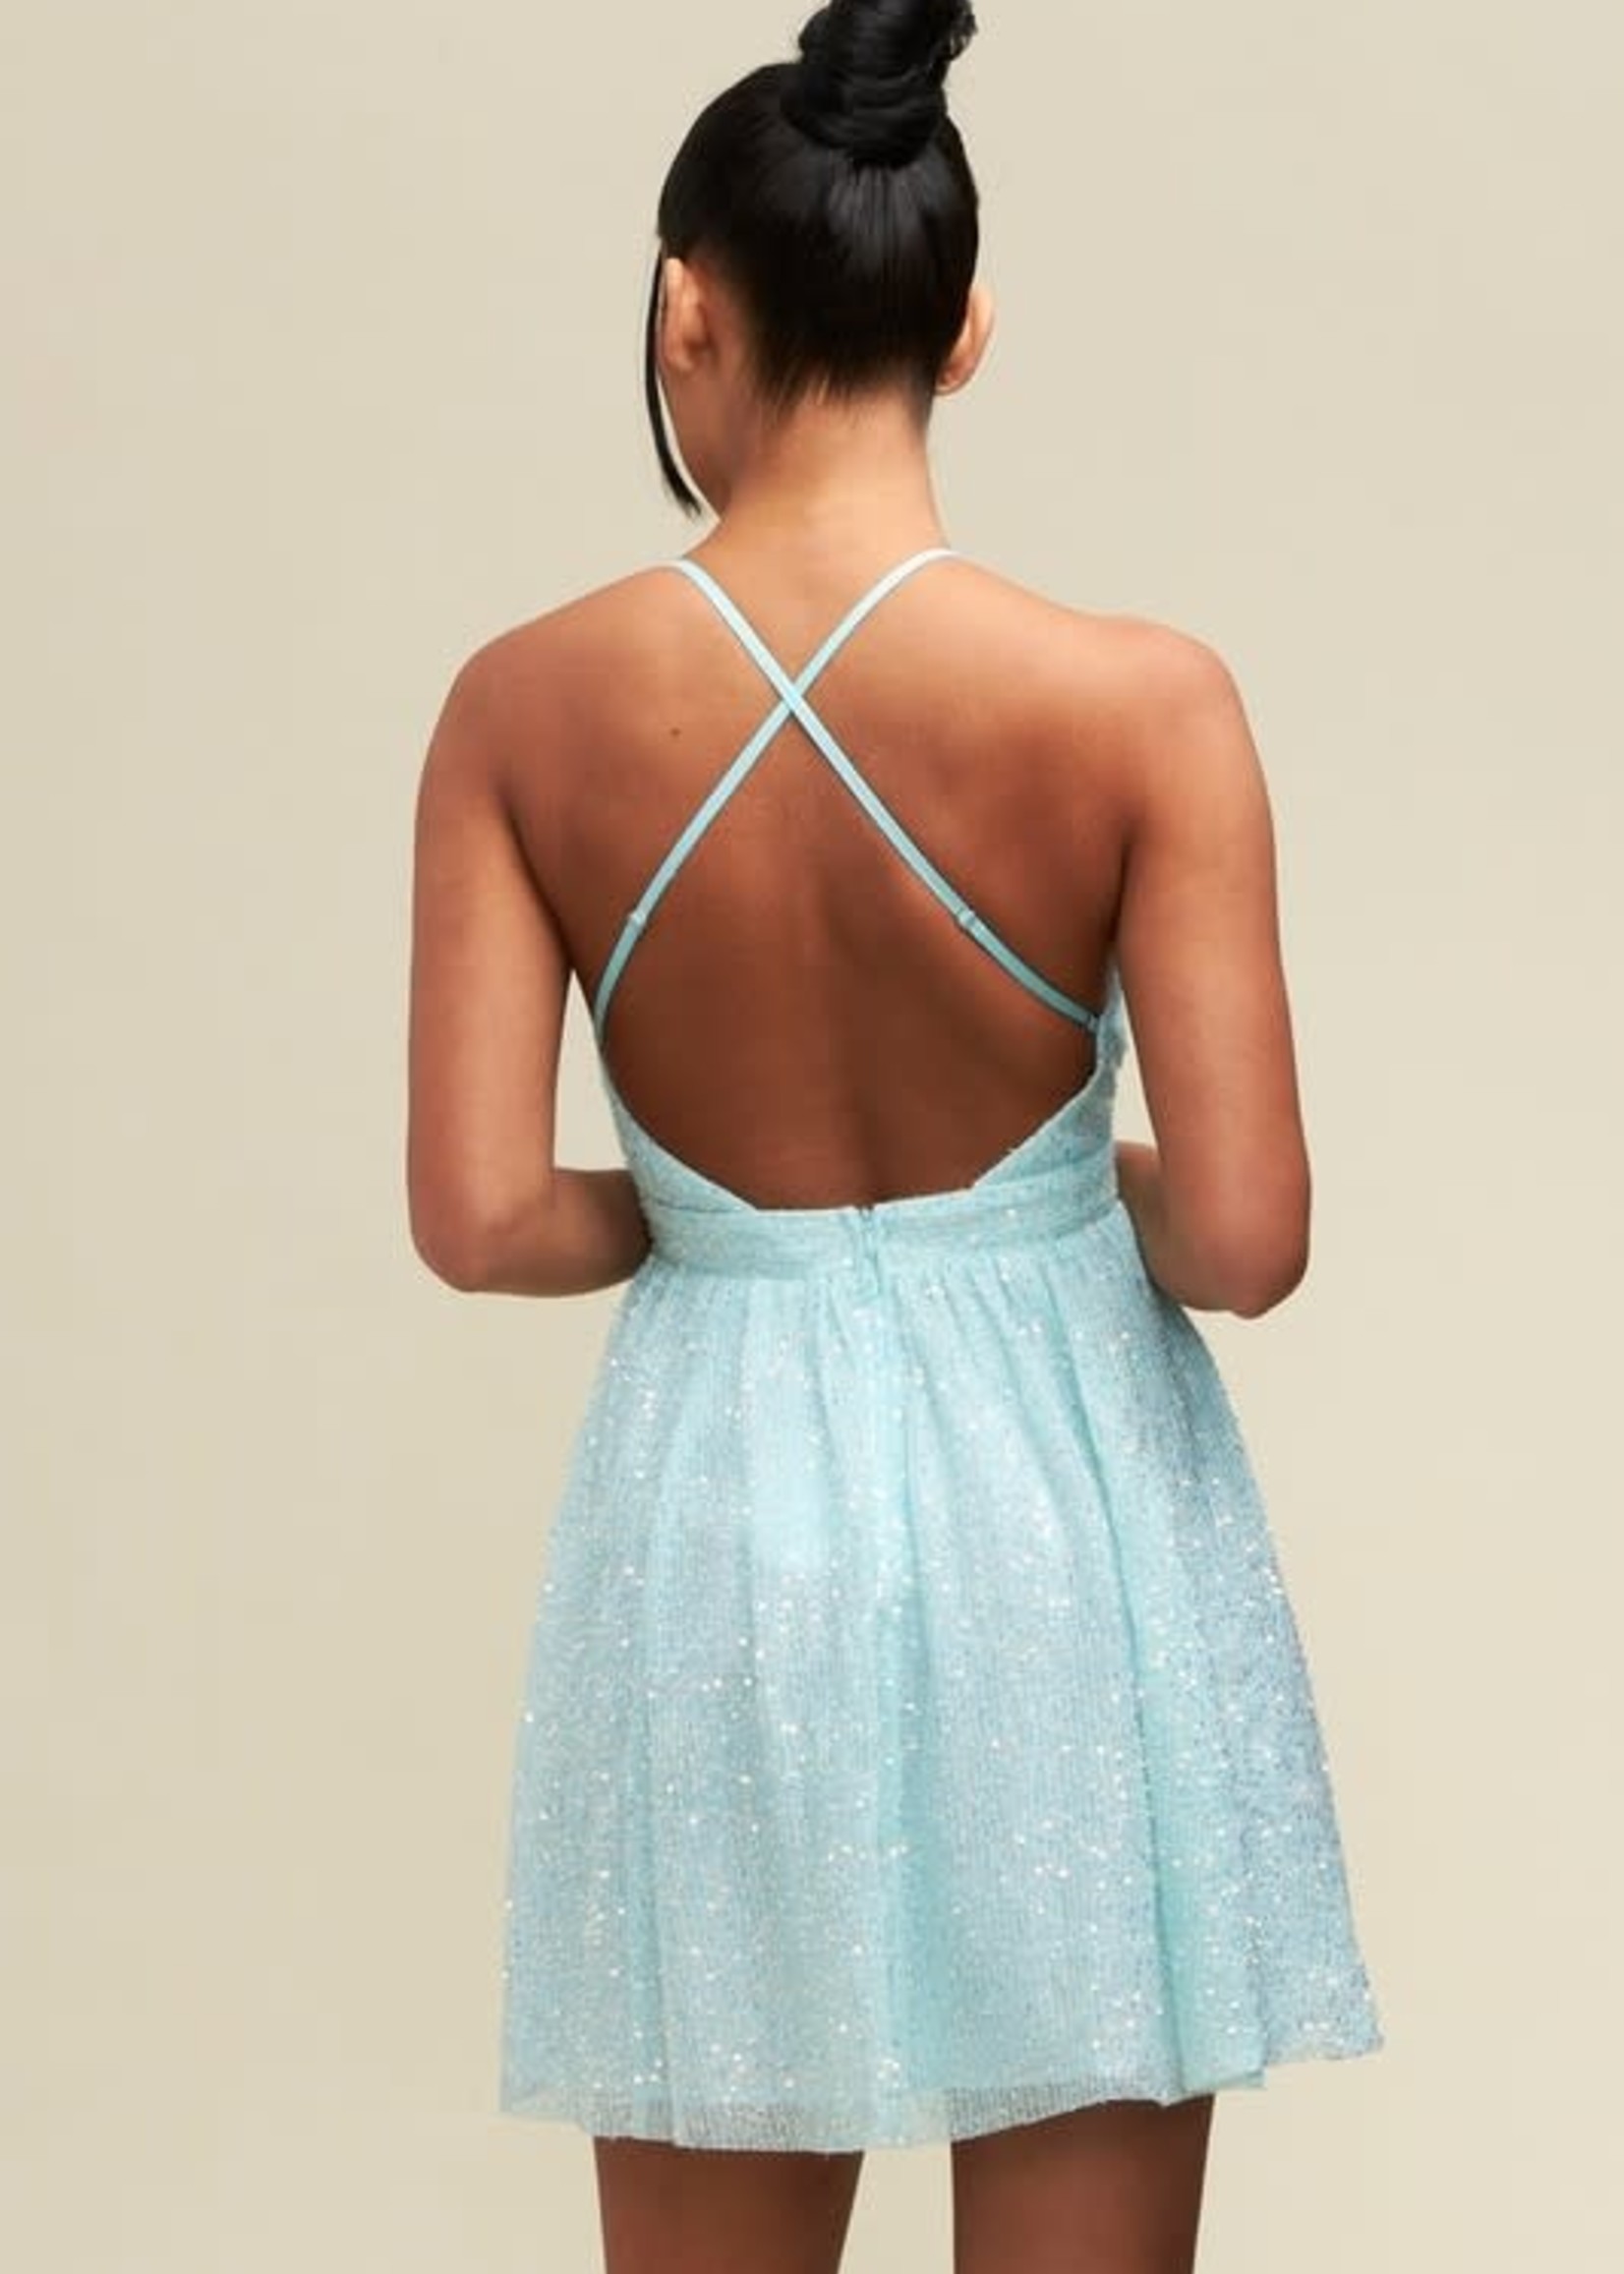 Gleam and Dream Blue Party Dress